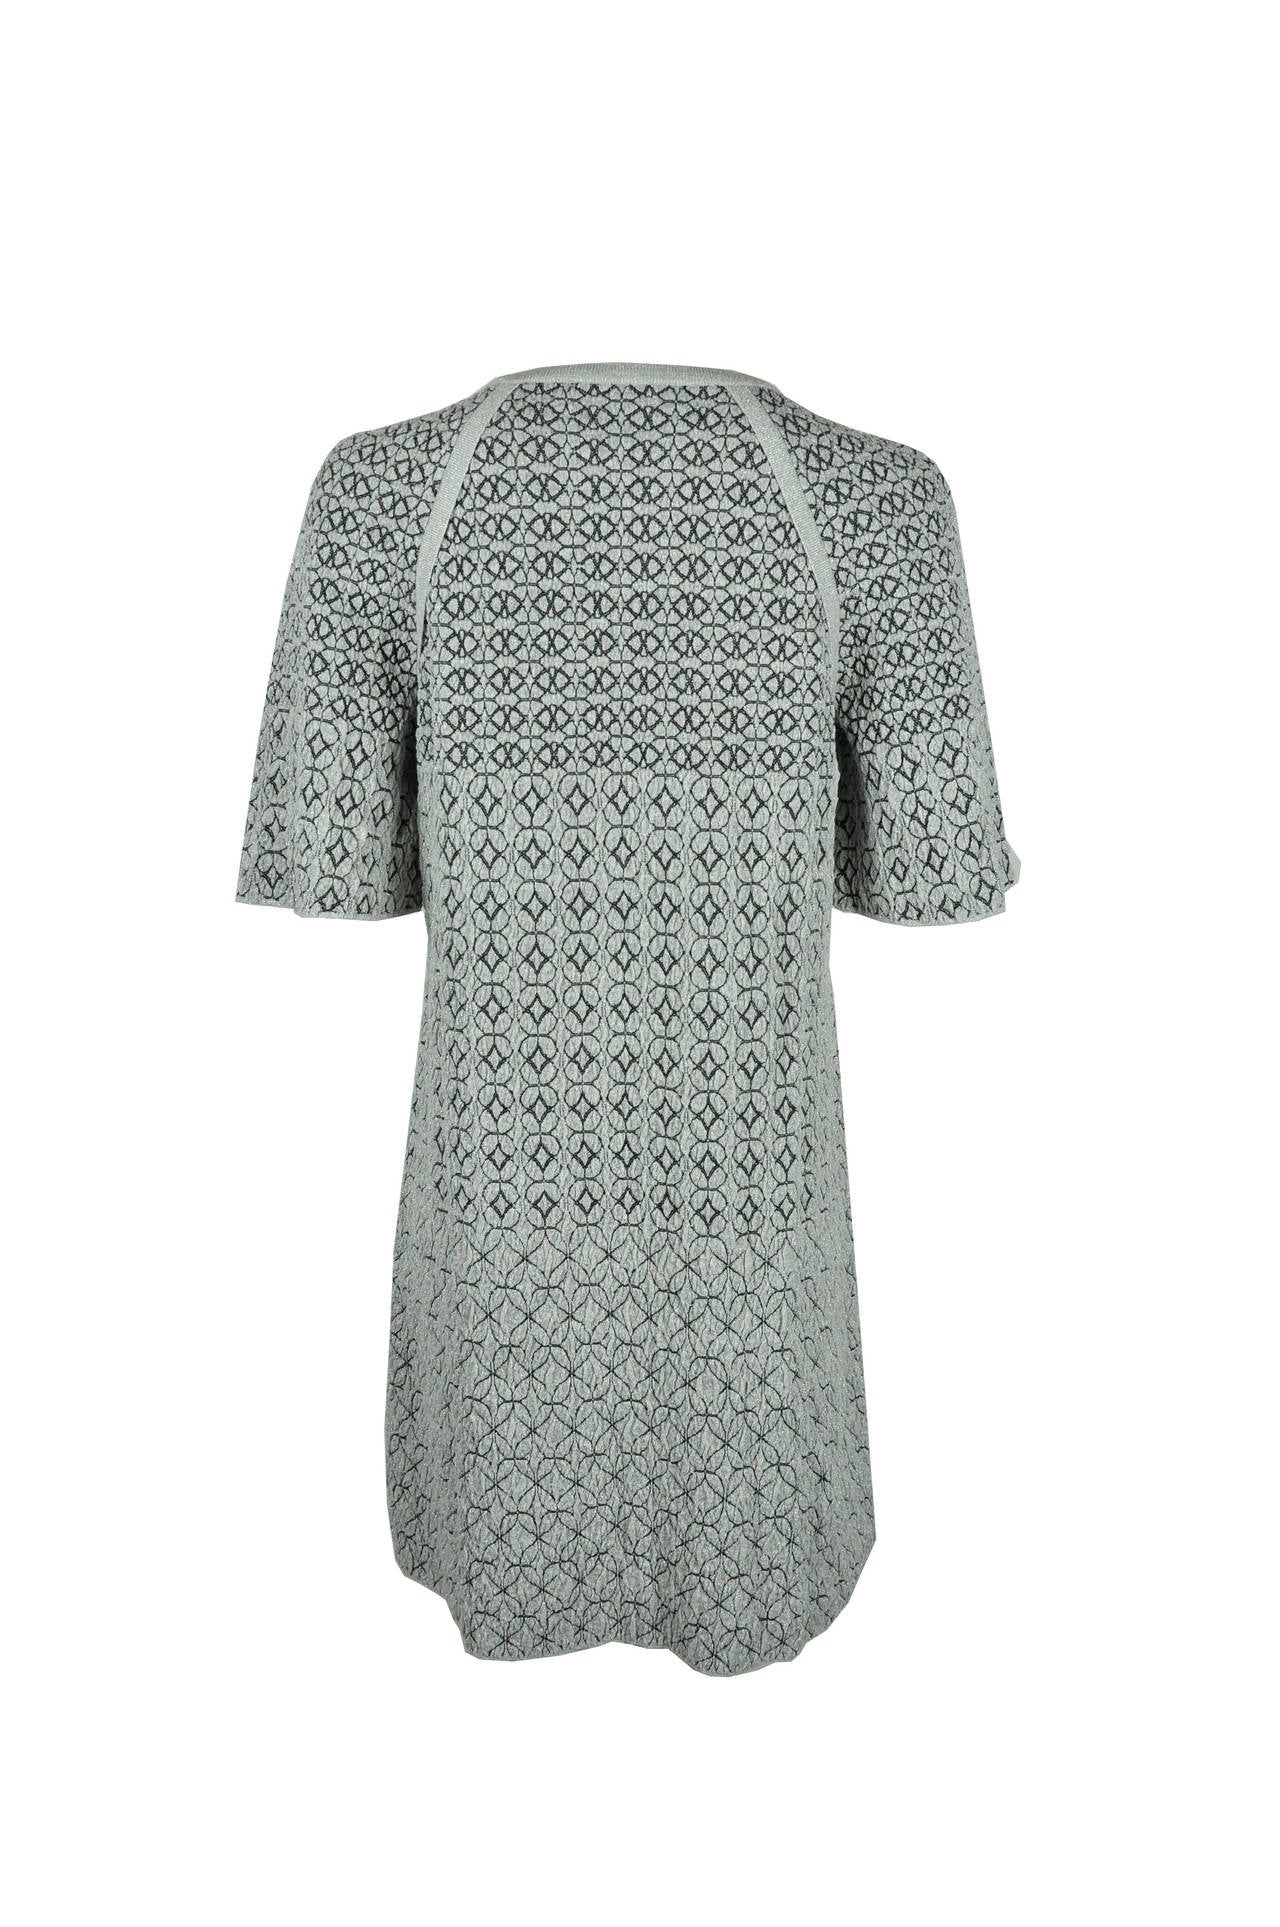 A glittering slip on Chanel graphic print jacquard knit dress features with round neck and kimono sleeves for a feminine silhouette. Two front button fastening pockets.